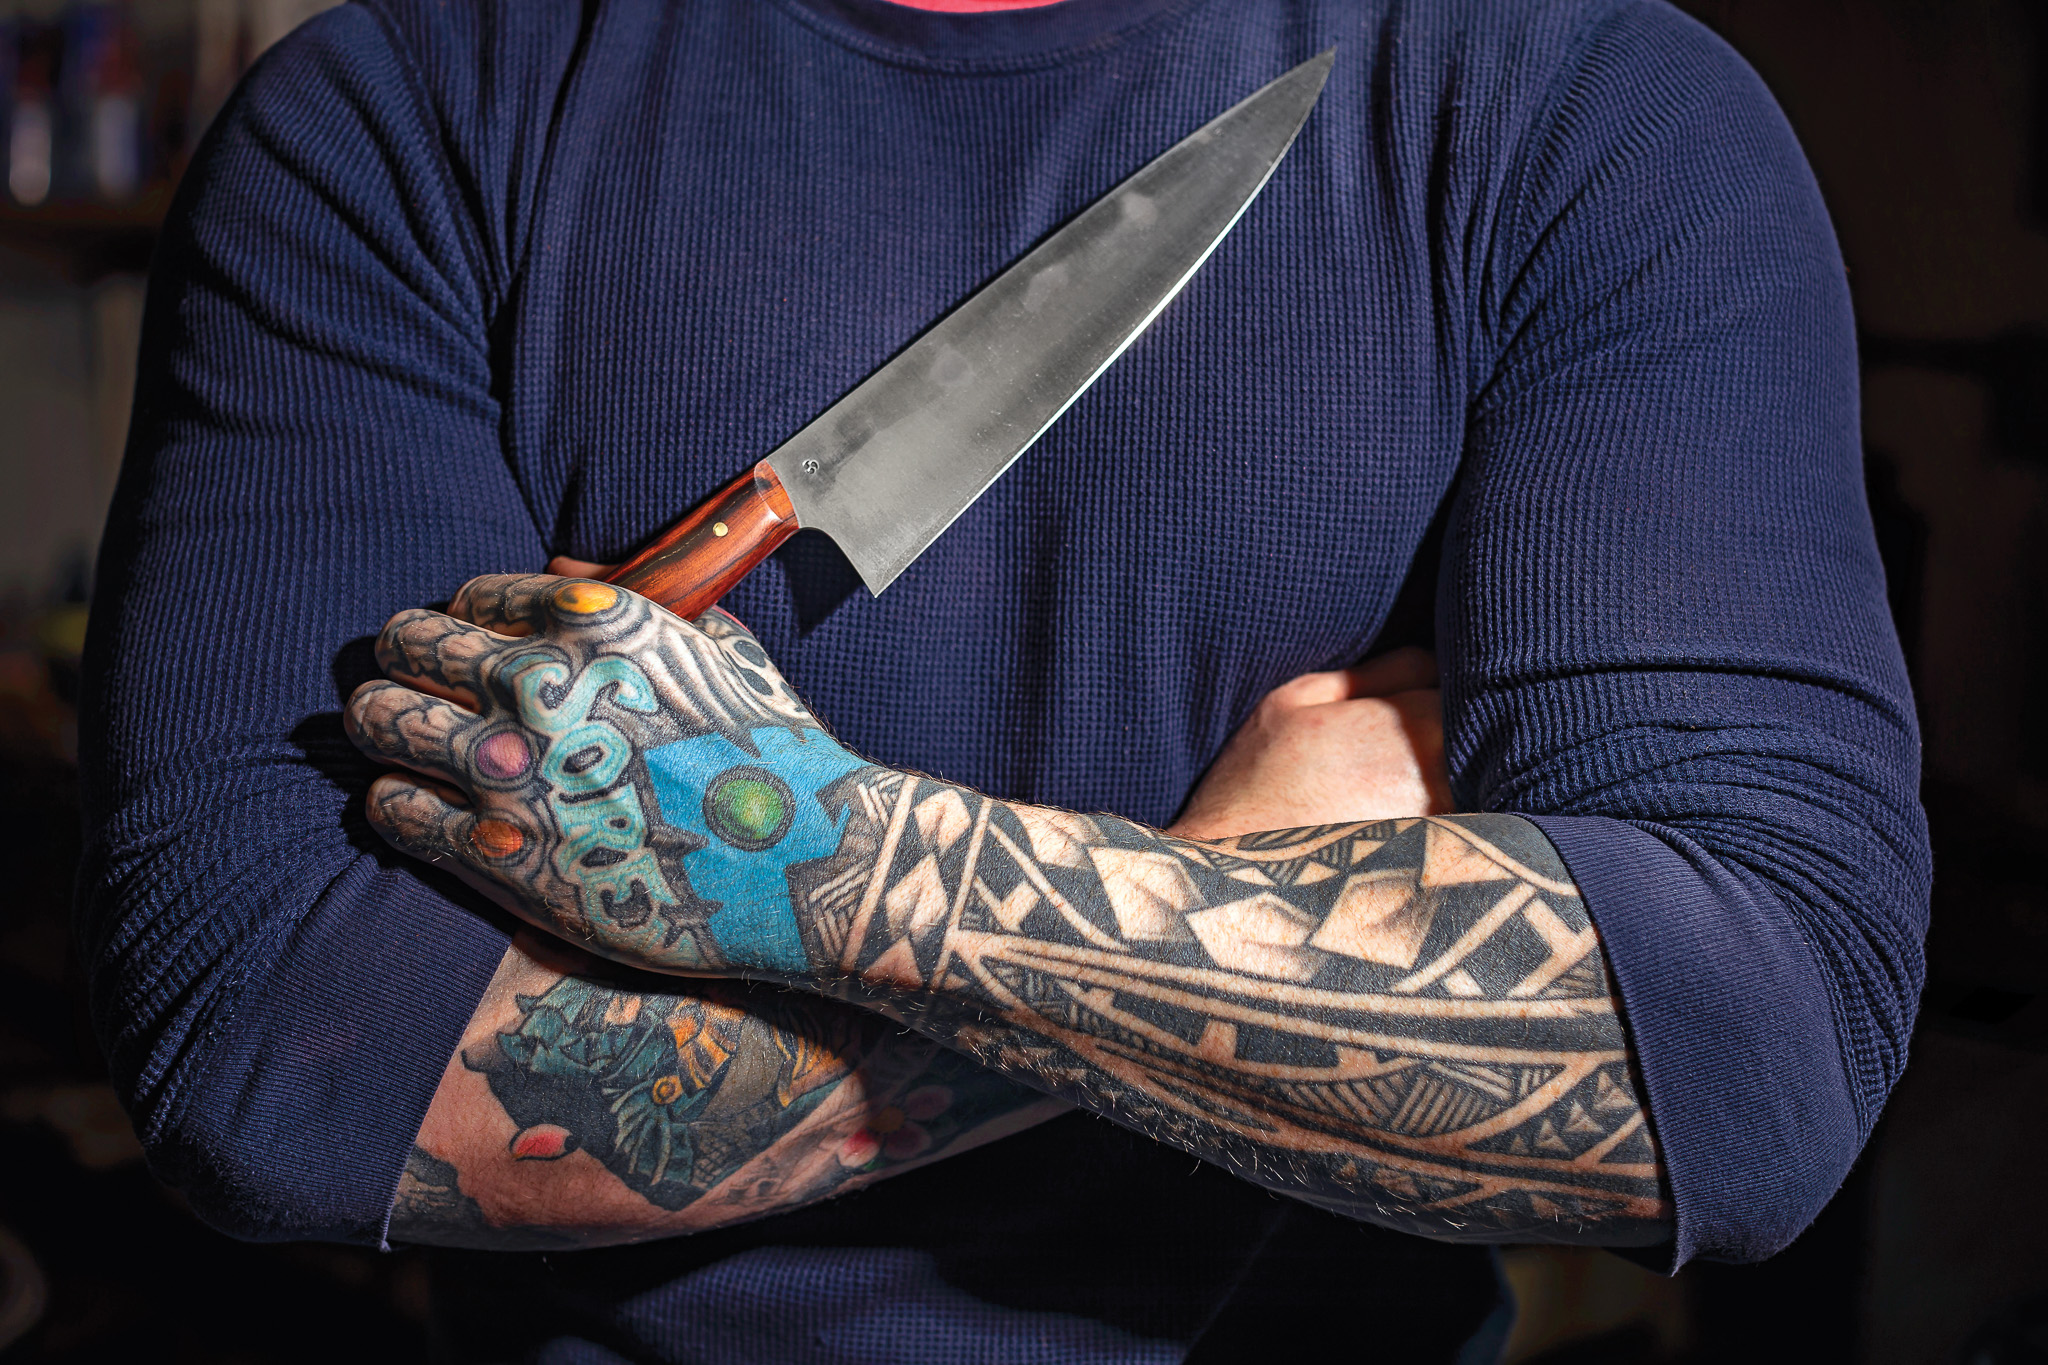 A tattooed knifemaker in Portland holds a big chef's knife across his chest.